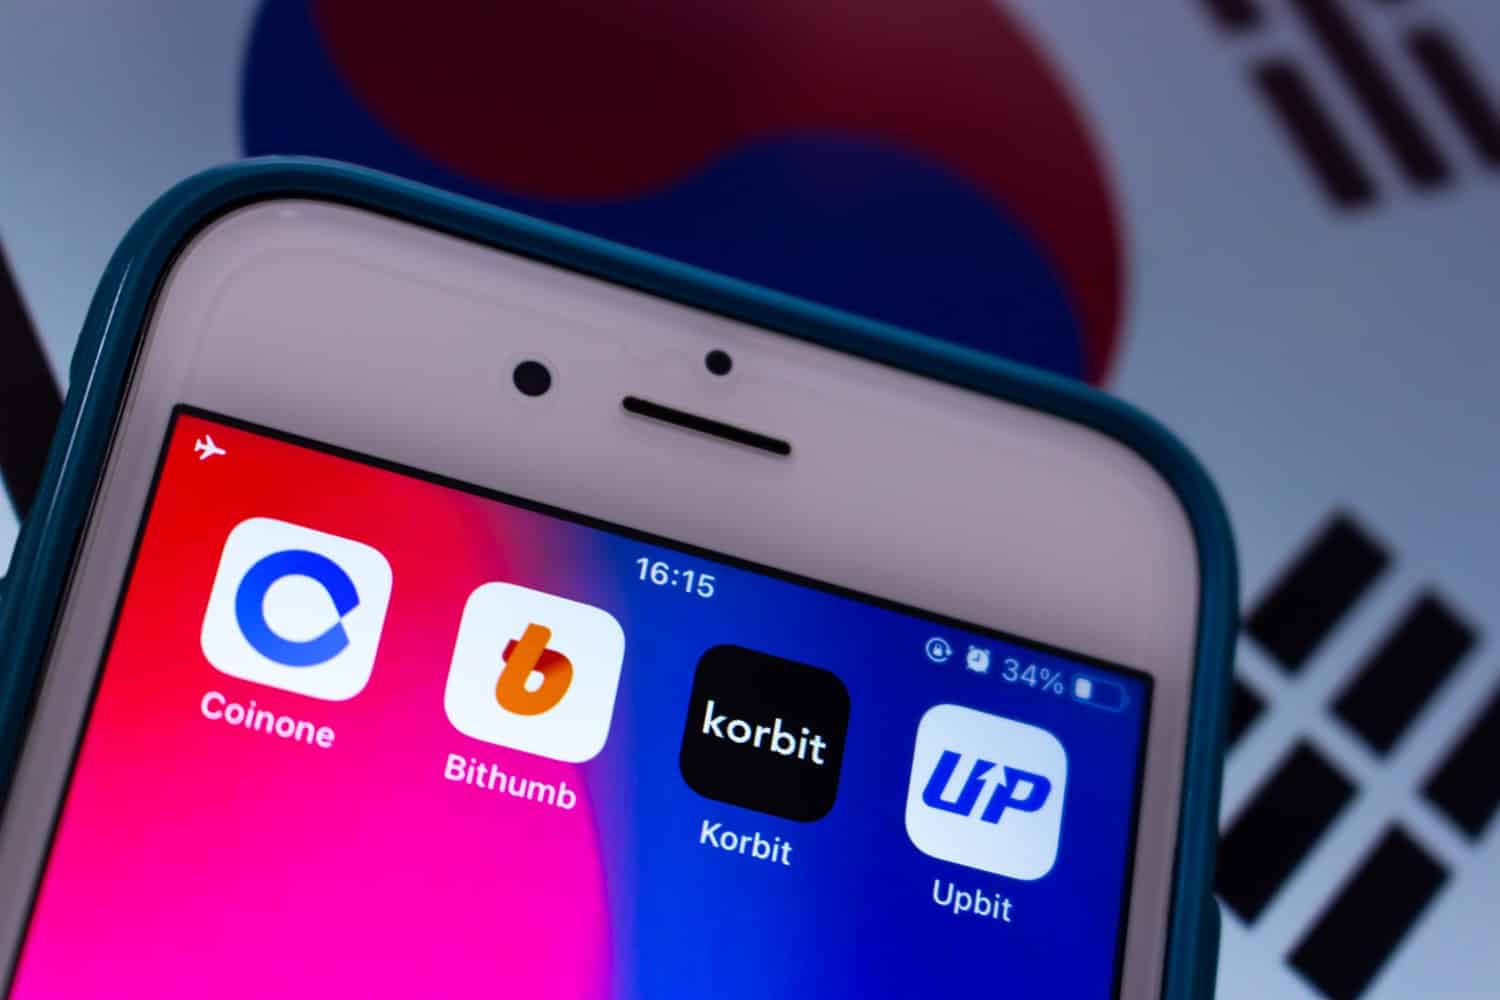 The apps of Coinone, Bithumb, Korbit, and Upbit on an iPhone screen with the South Korean flag in the background.